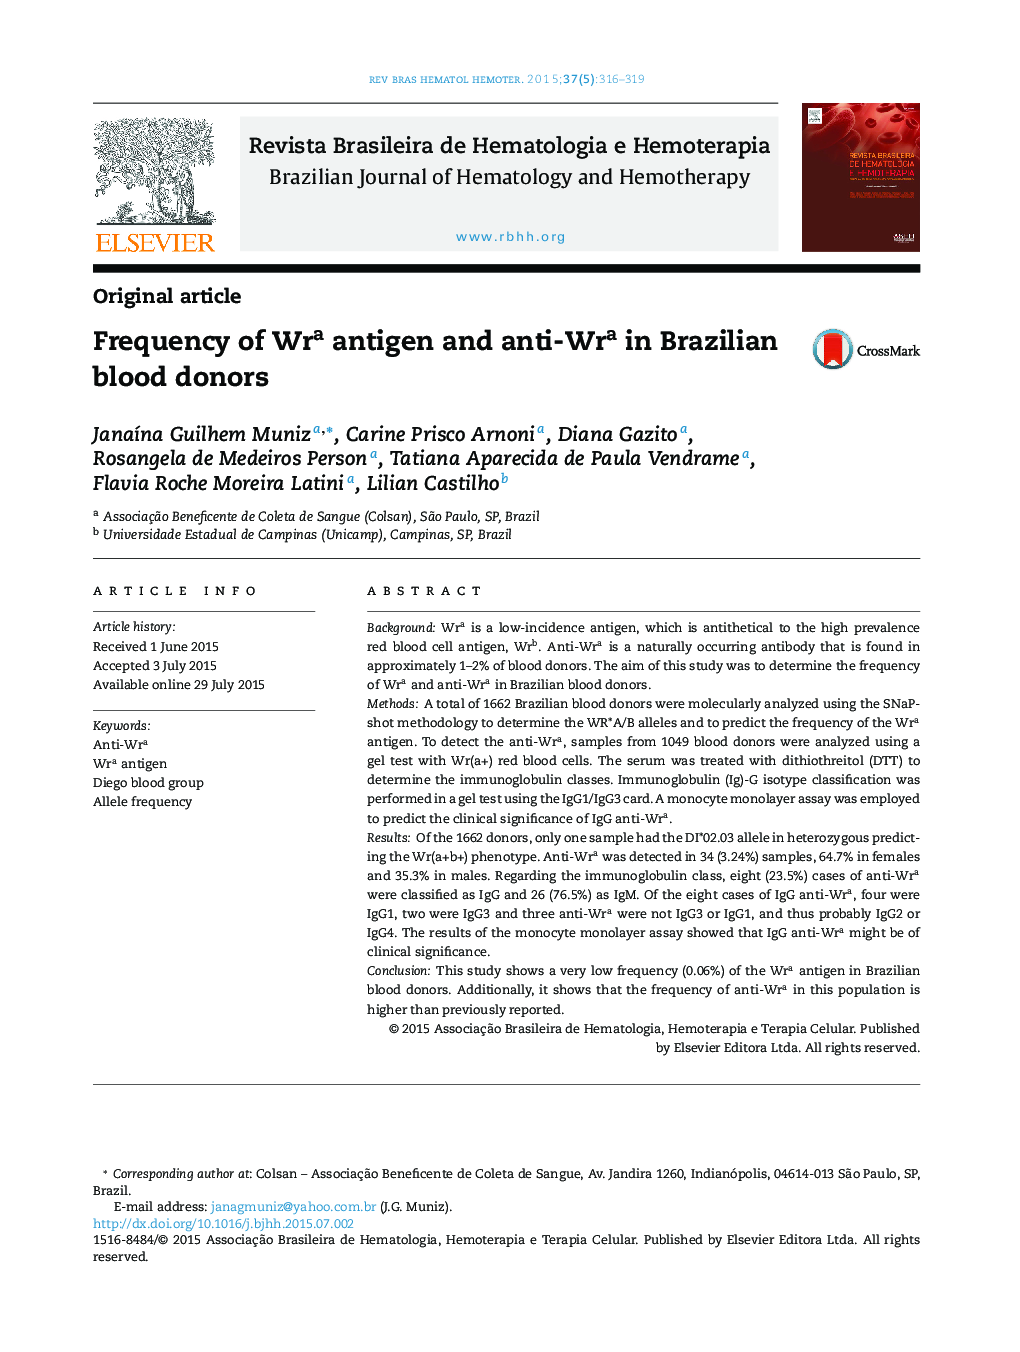 Frequency of Wra antigen and anti-Wra in Brazilian blood donors